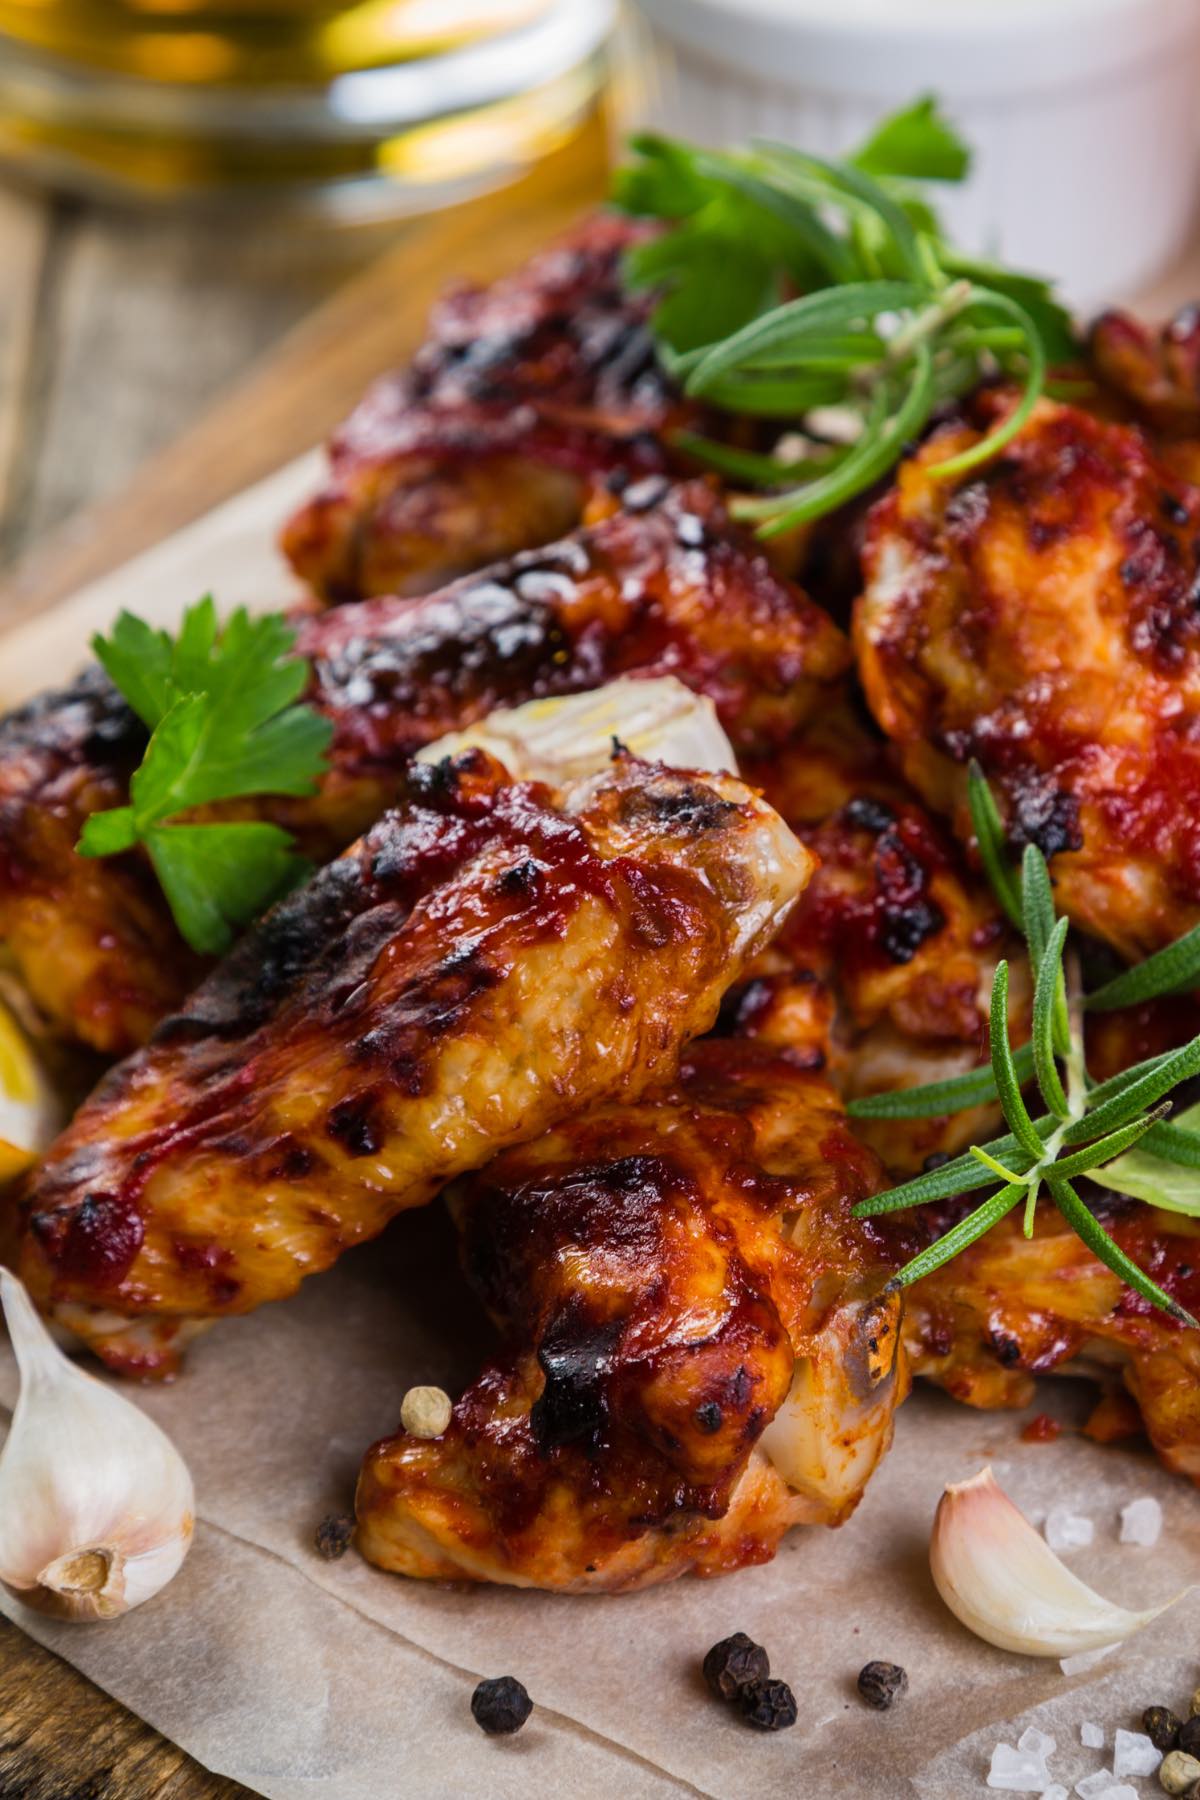 Once you’ve tried Jamaican jerk chicken, you will want to have it again and again! We’ve rounded up 15 Best Jerk Chicken Sides which will take your jerk chicken experience to a new level! From vegetables to rice and potatoes, there will be something for everyone!